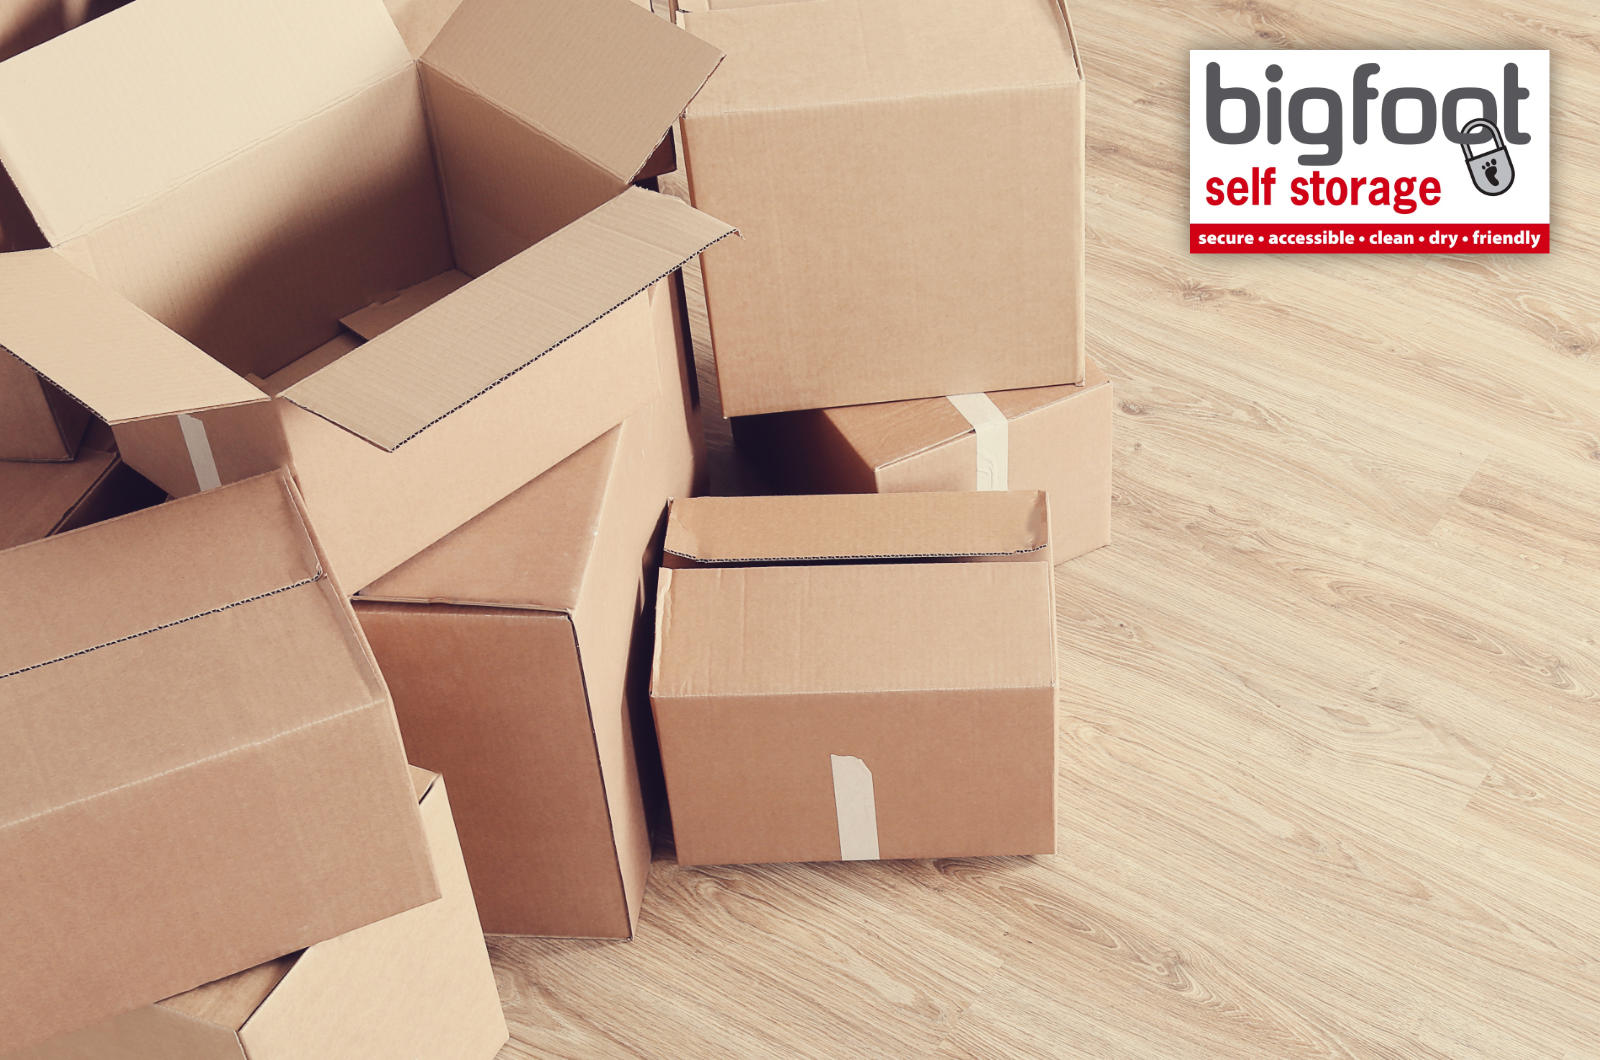 Renting a storage unit: You should read this!